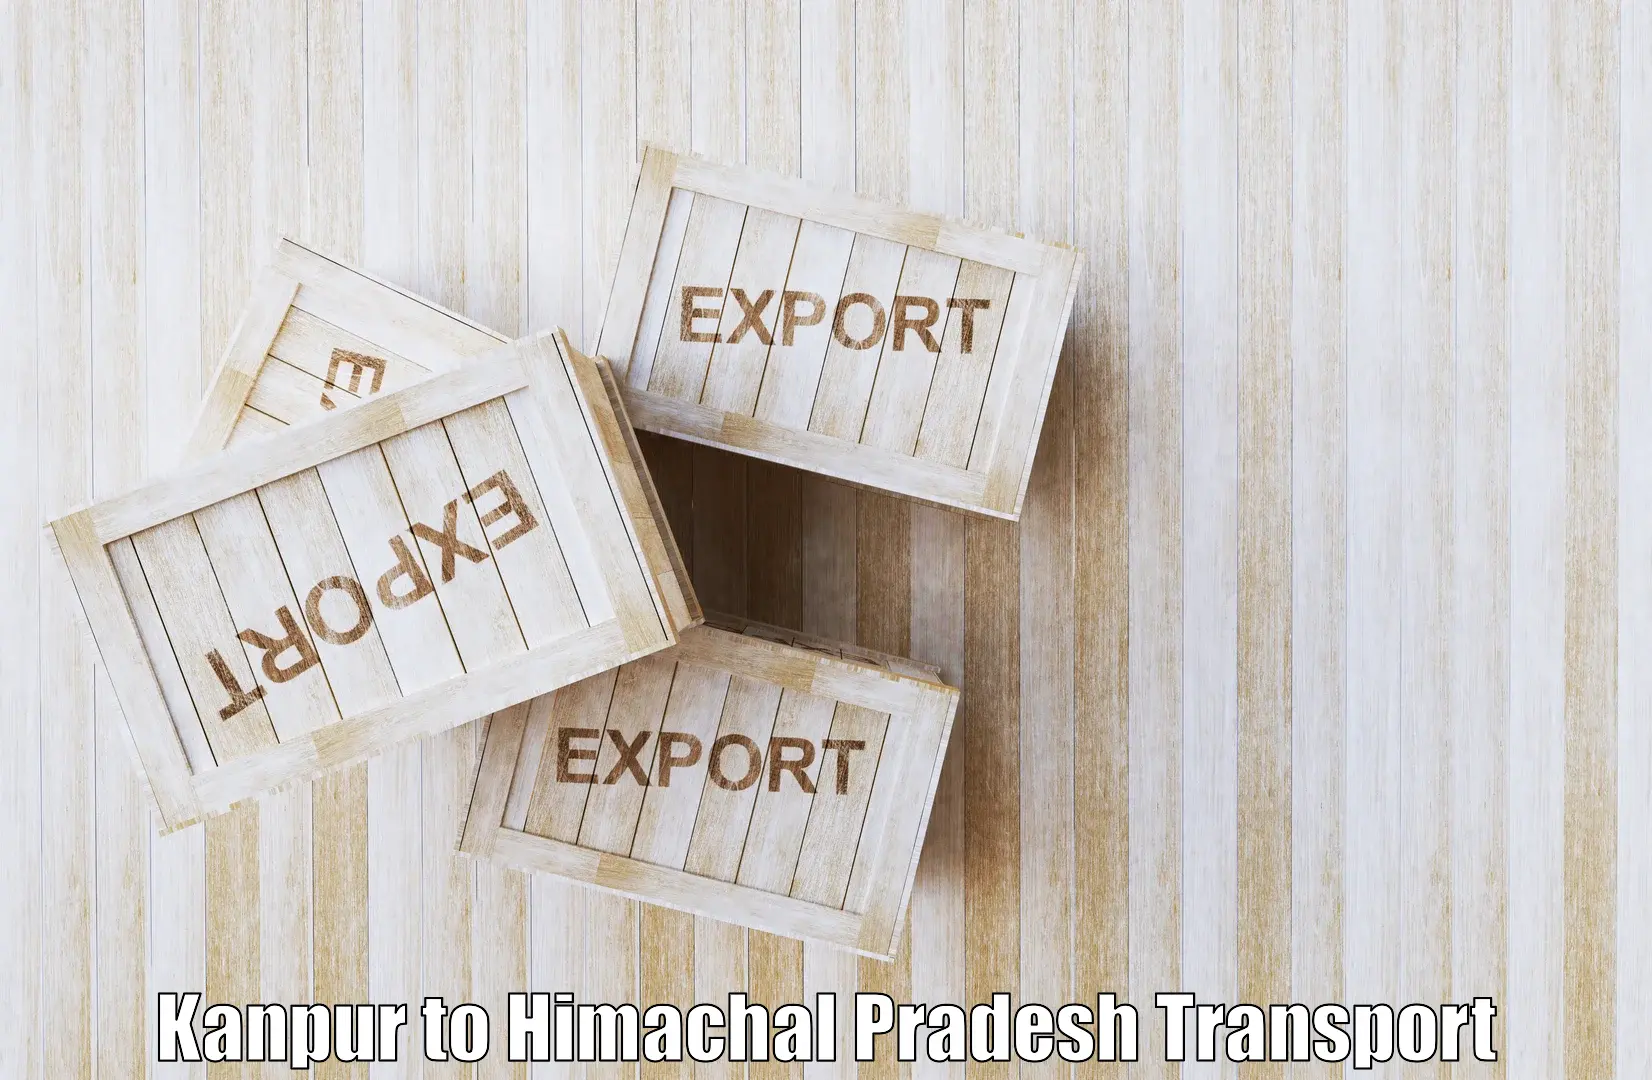 Container transport service Kanpur to Waknaghat